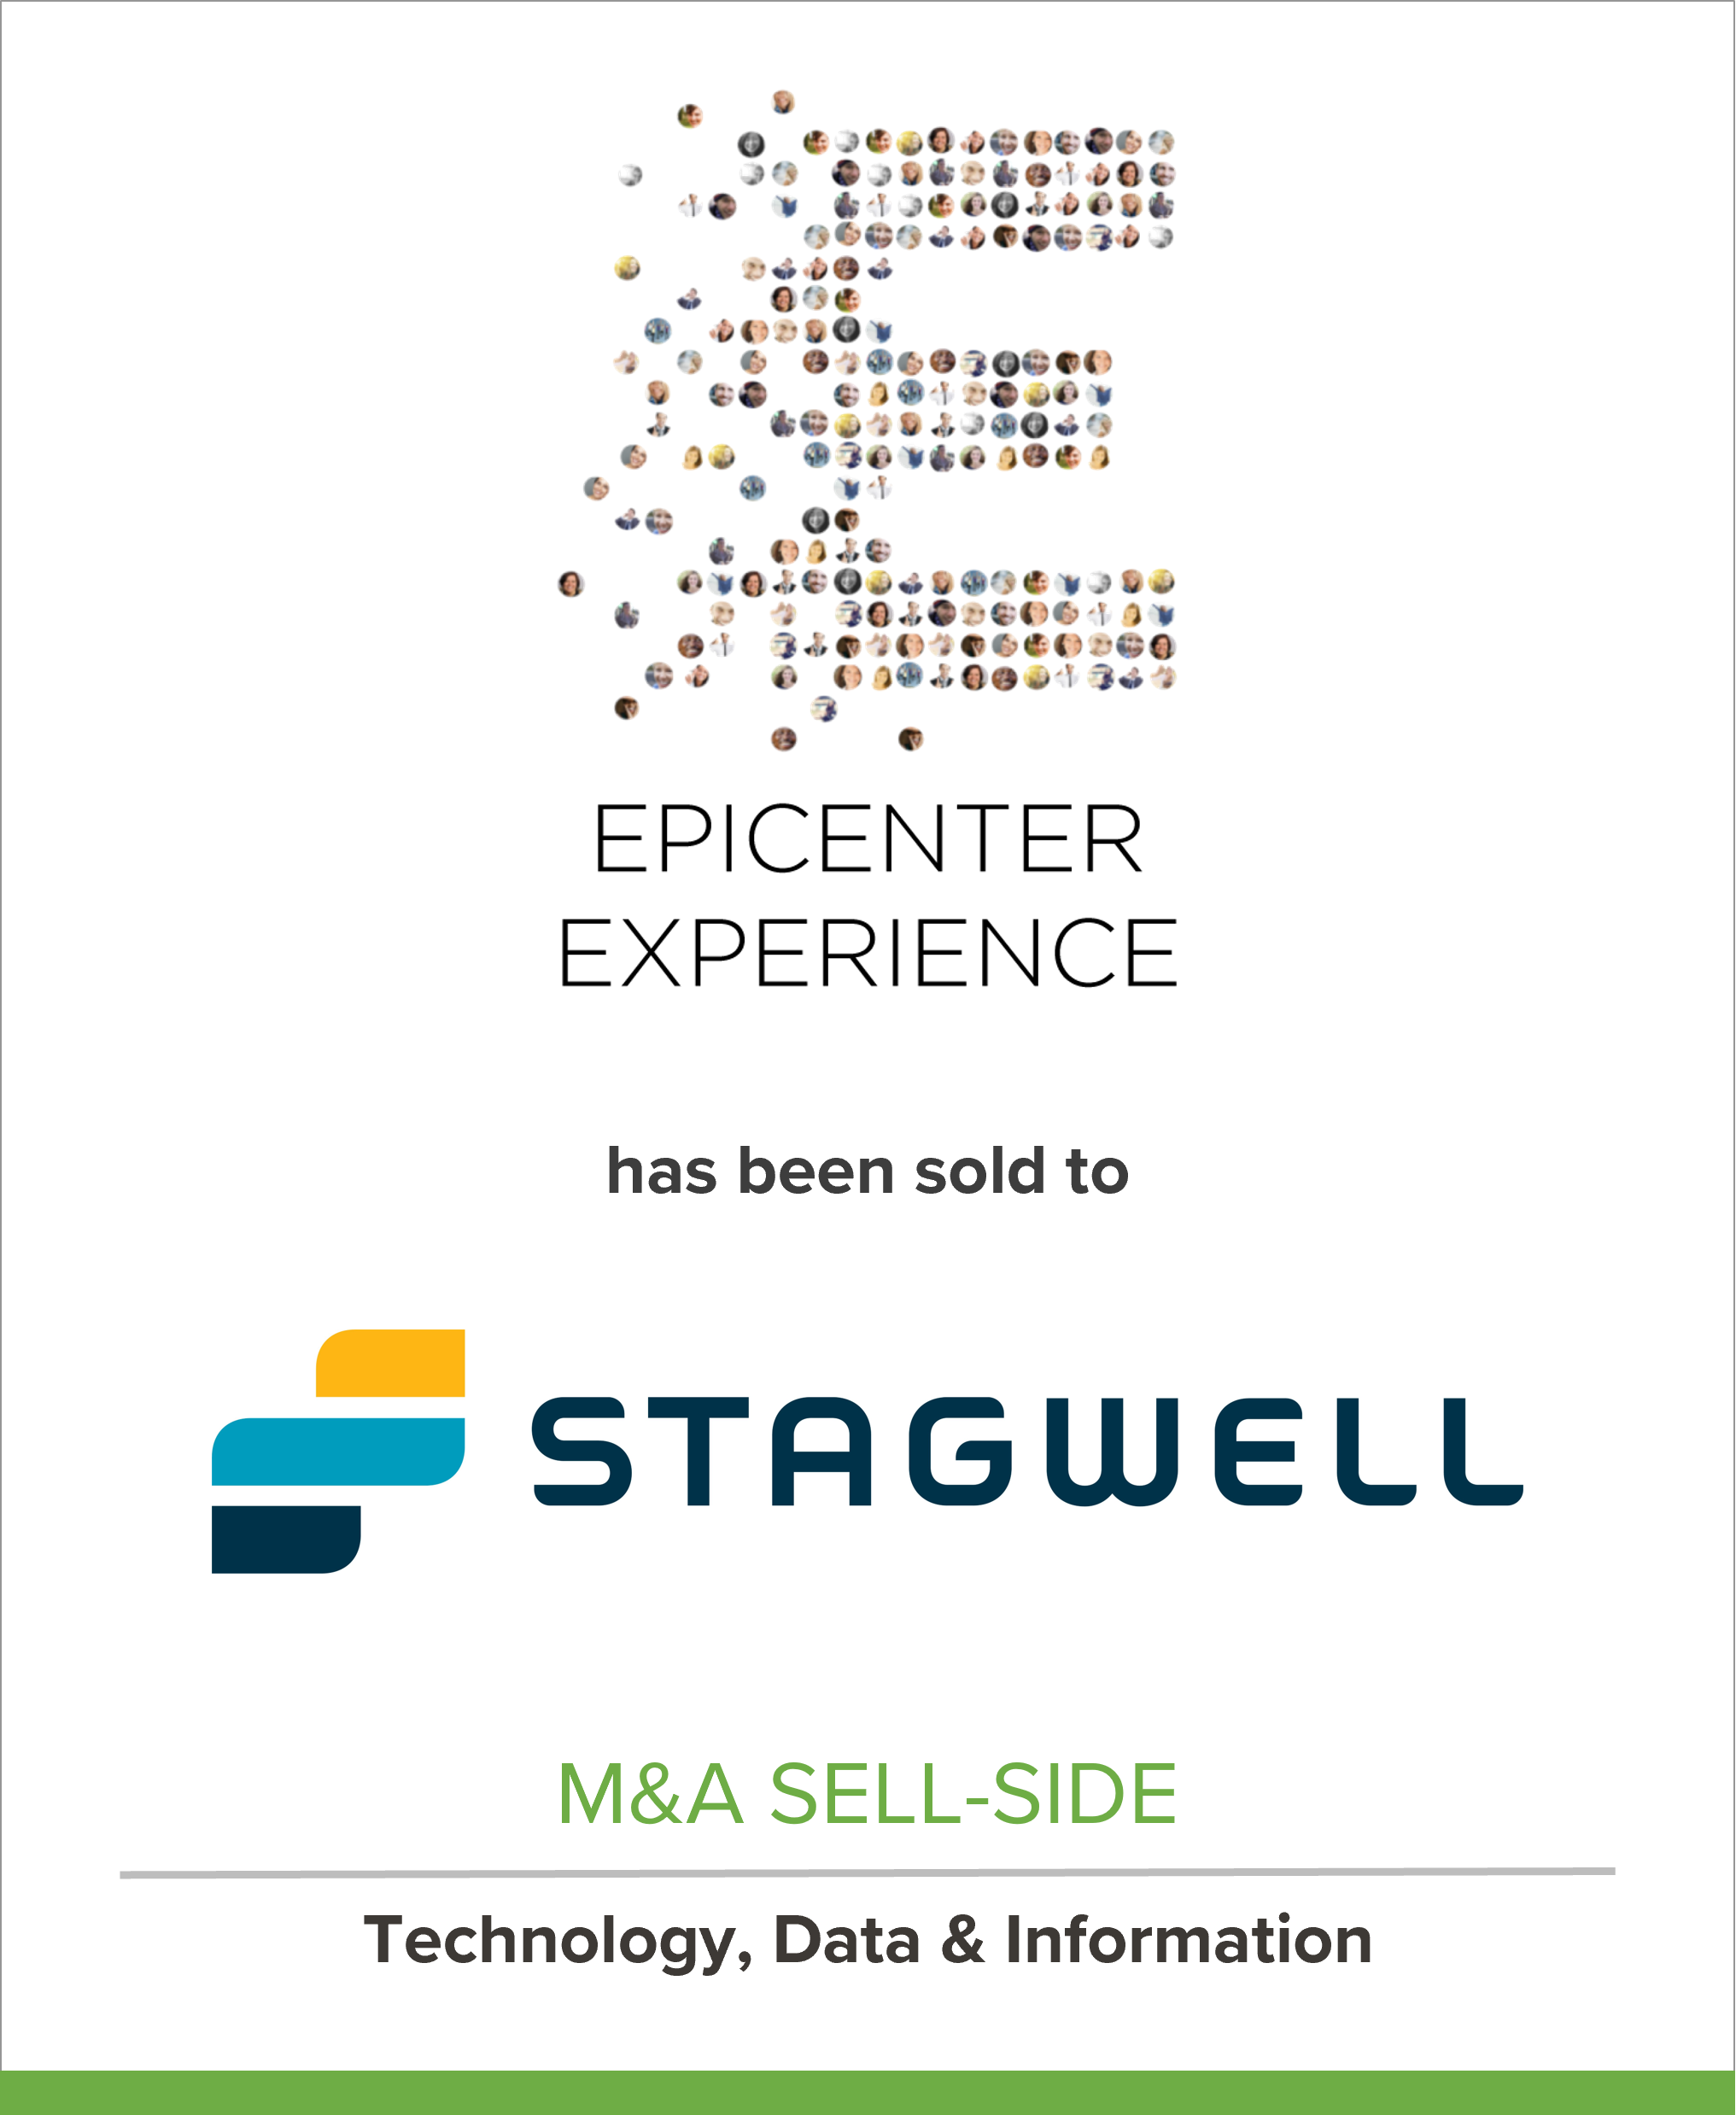 Epicenter Experience Has Been Sold to Stagwell